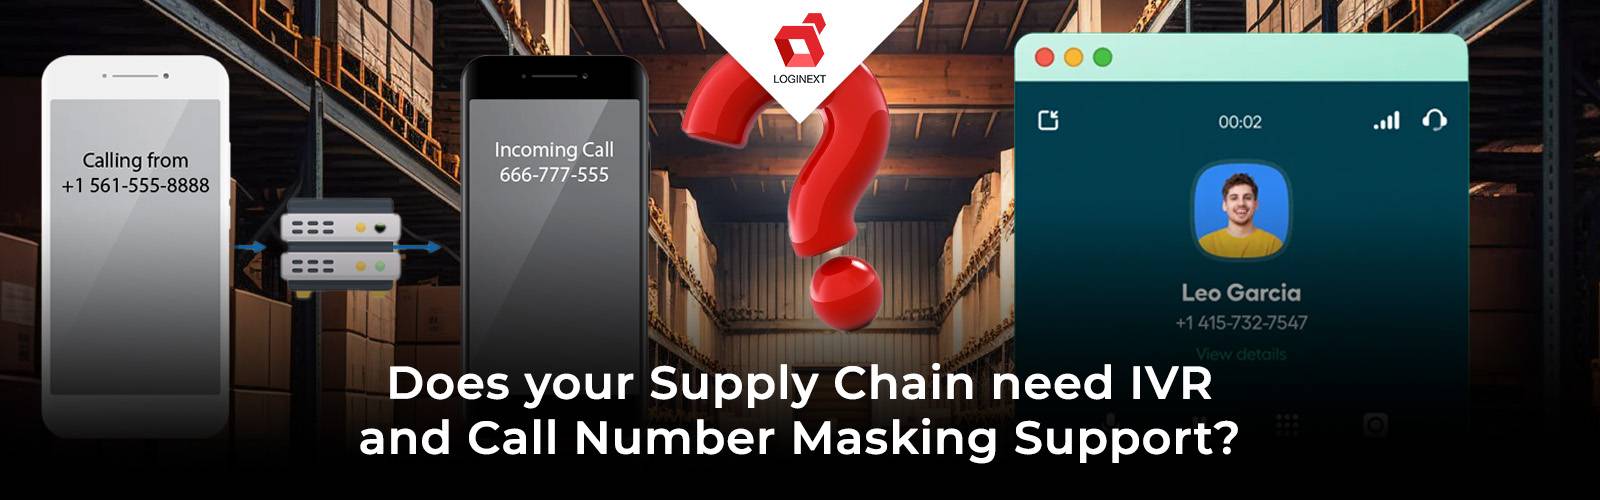 IVR and Call Number Masking in Modern Supply Chain